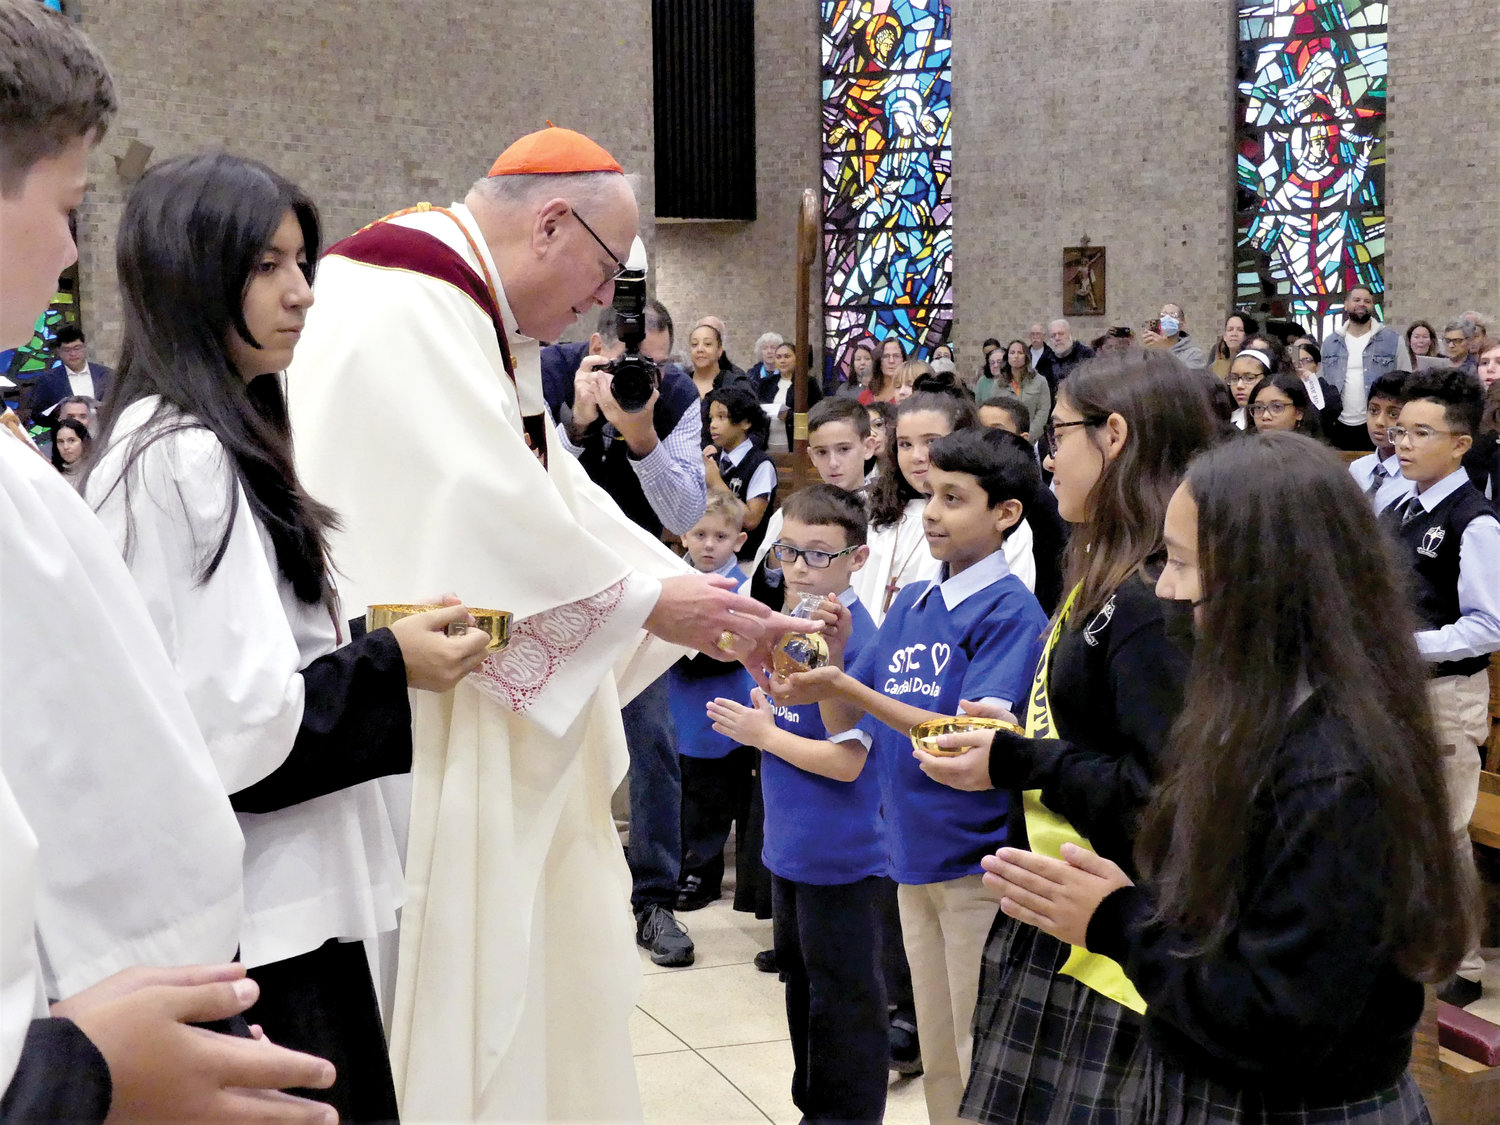 Cardinal Dolan receives offertory gifts from students at the Mass.